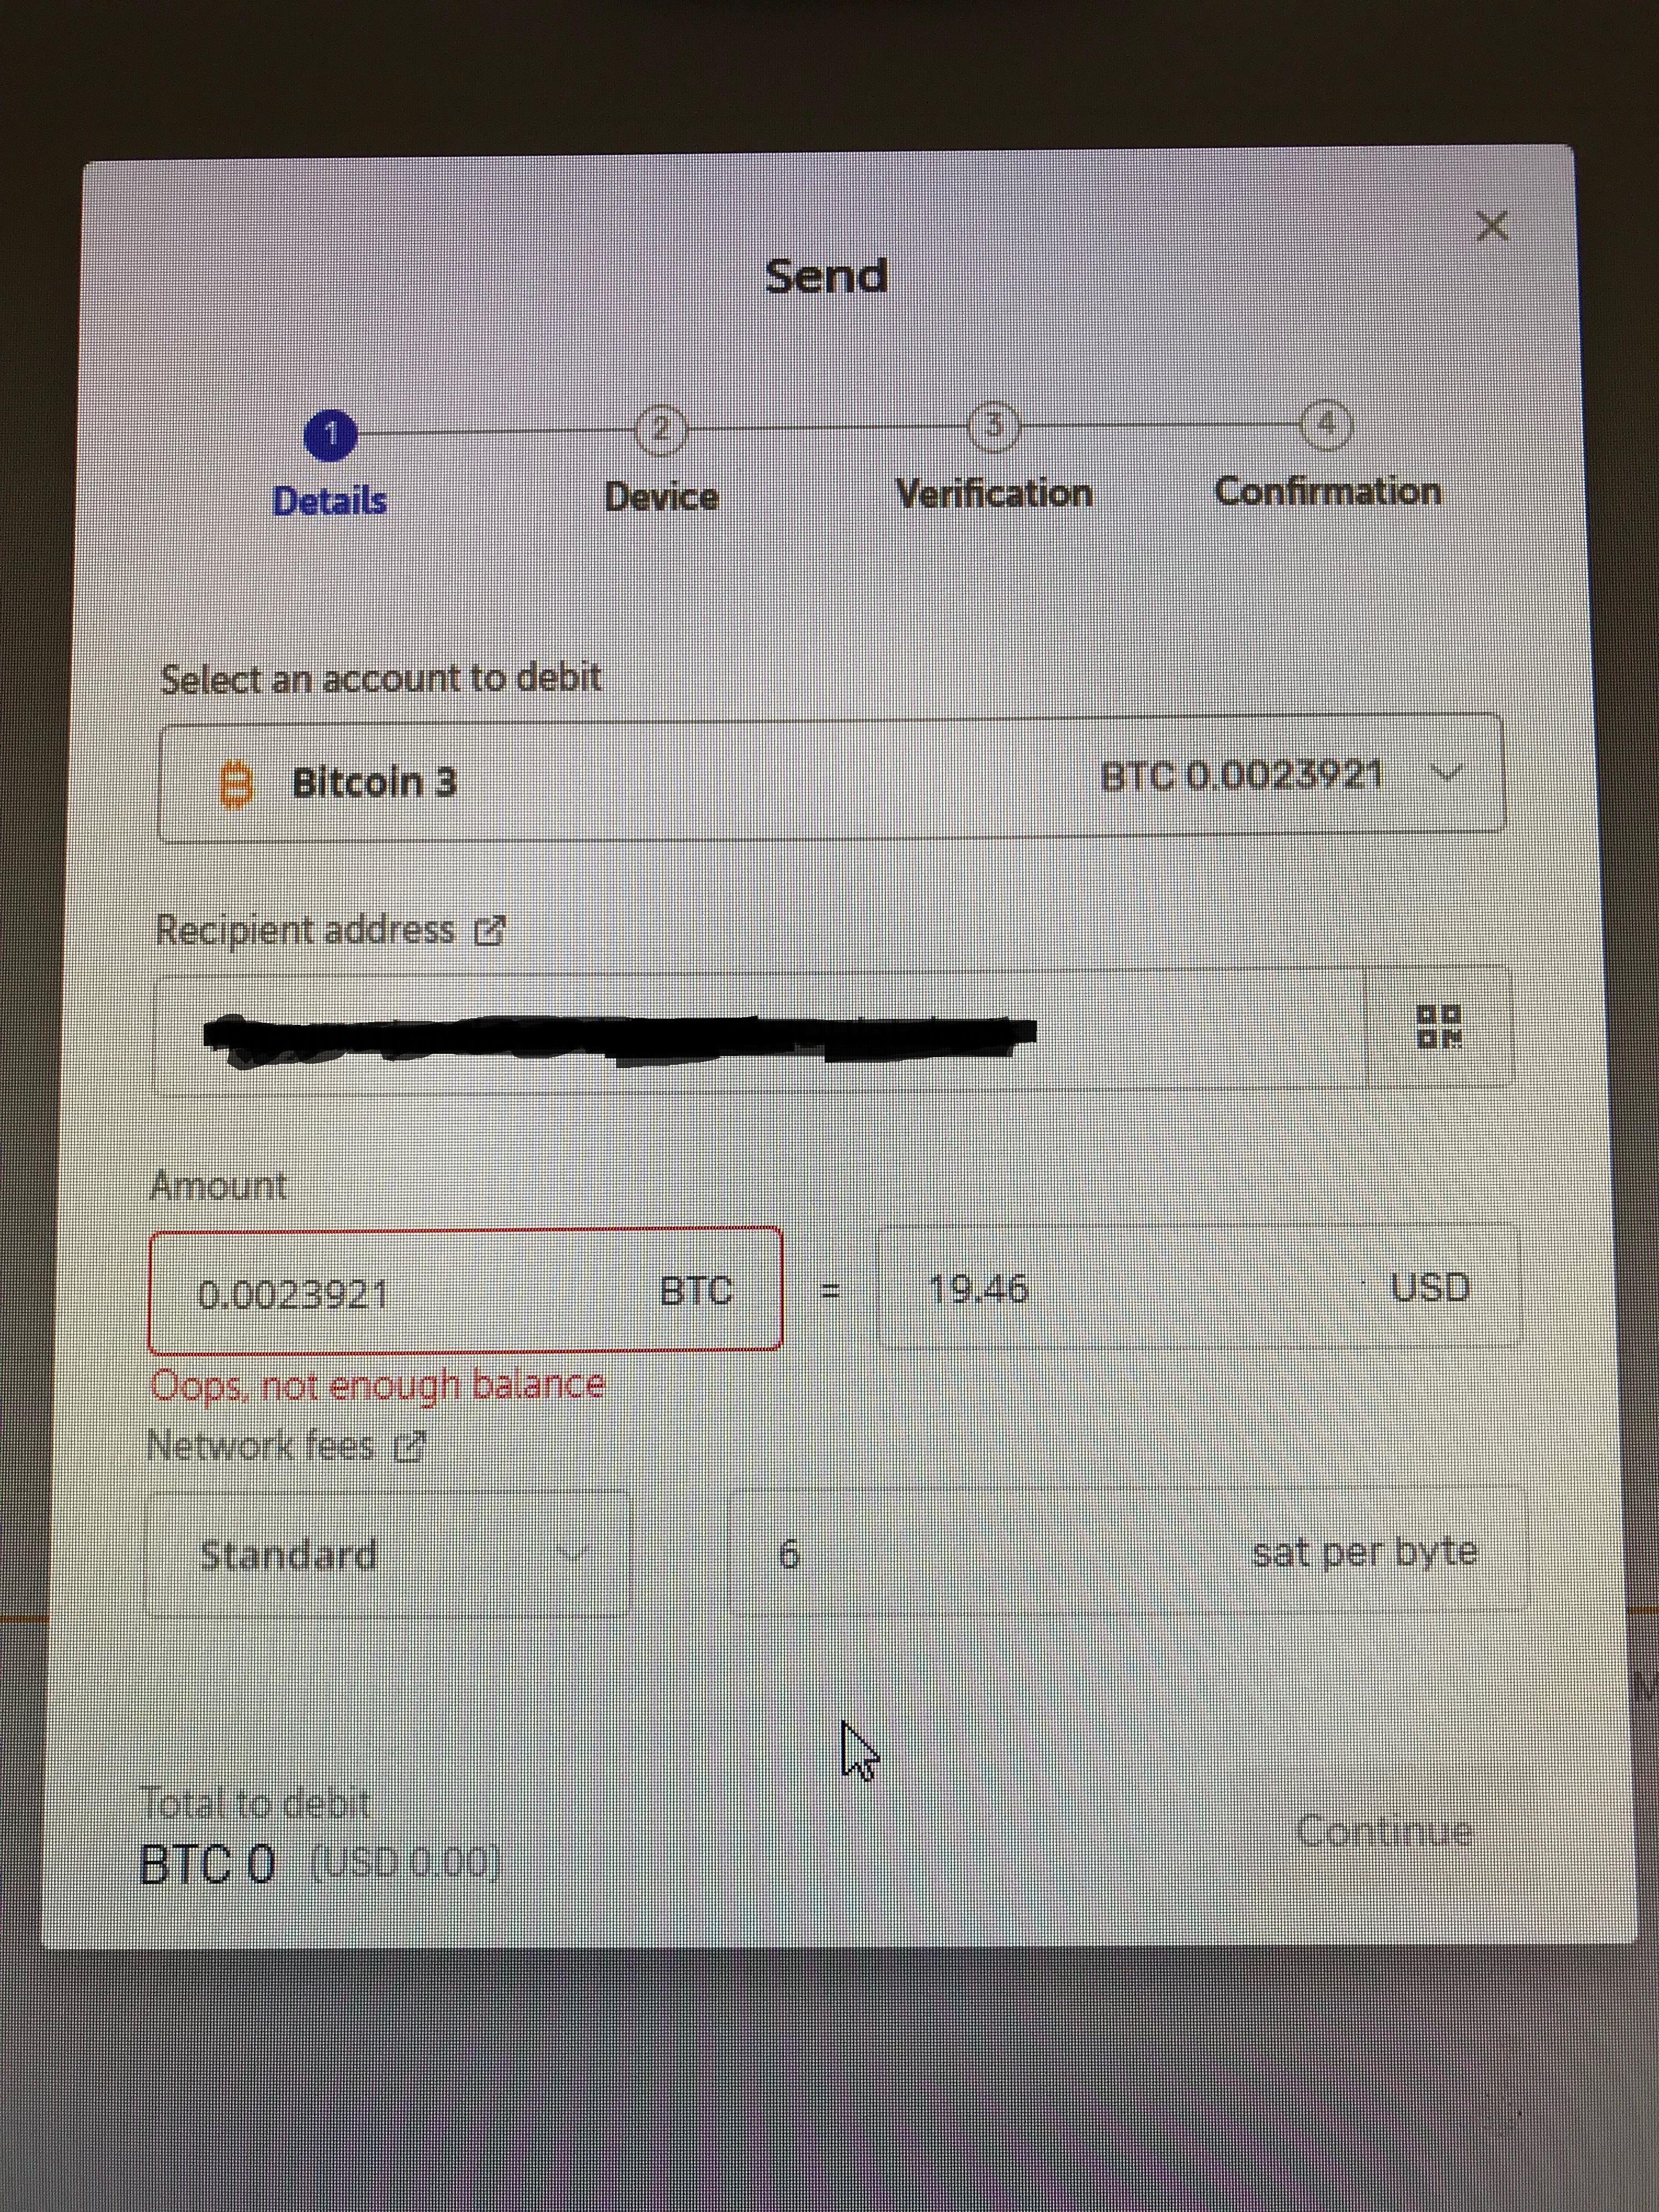 How To Send Bitcoin to Another Wallet | Ledger